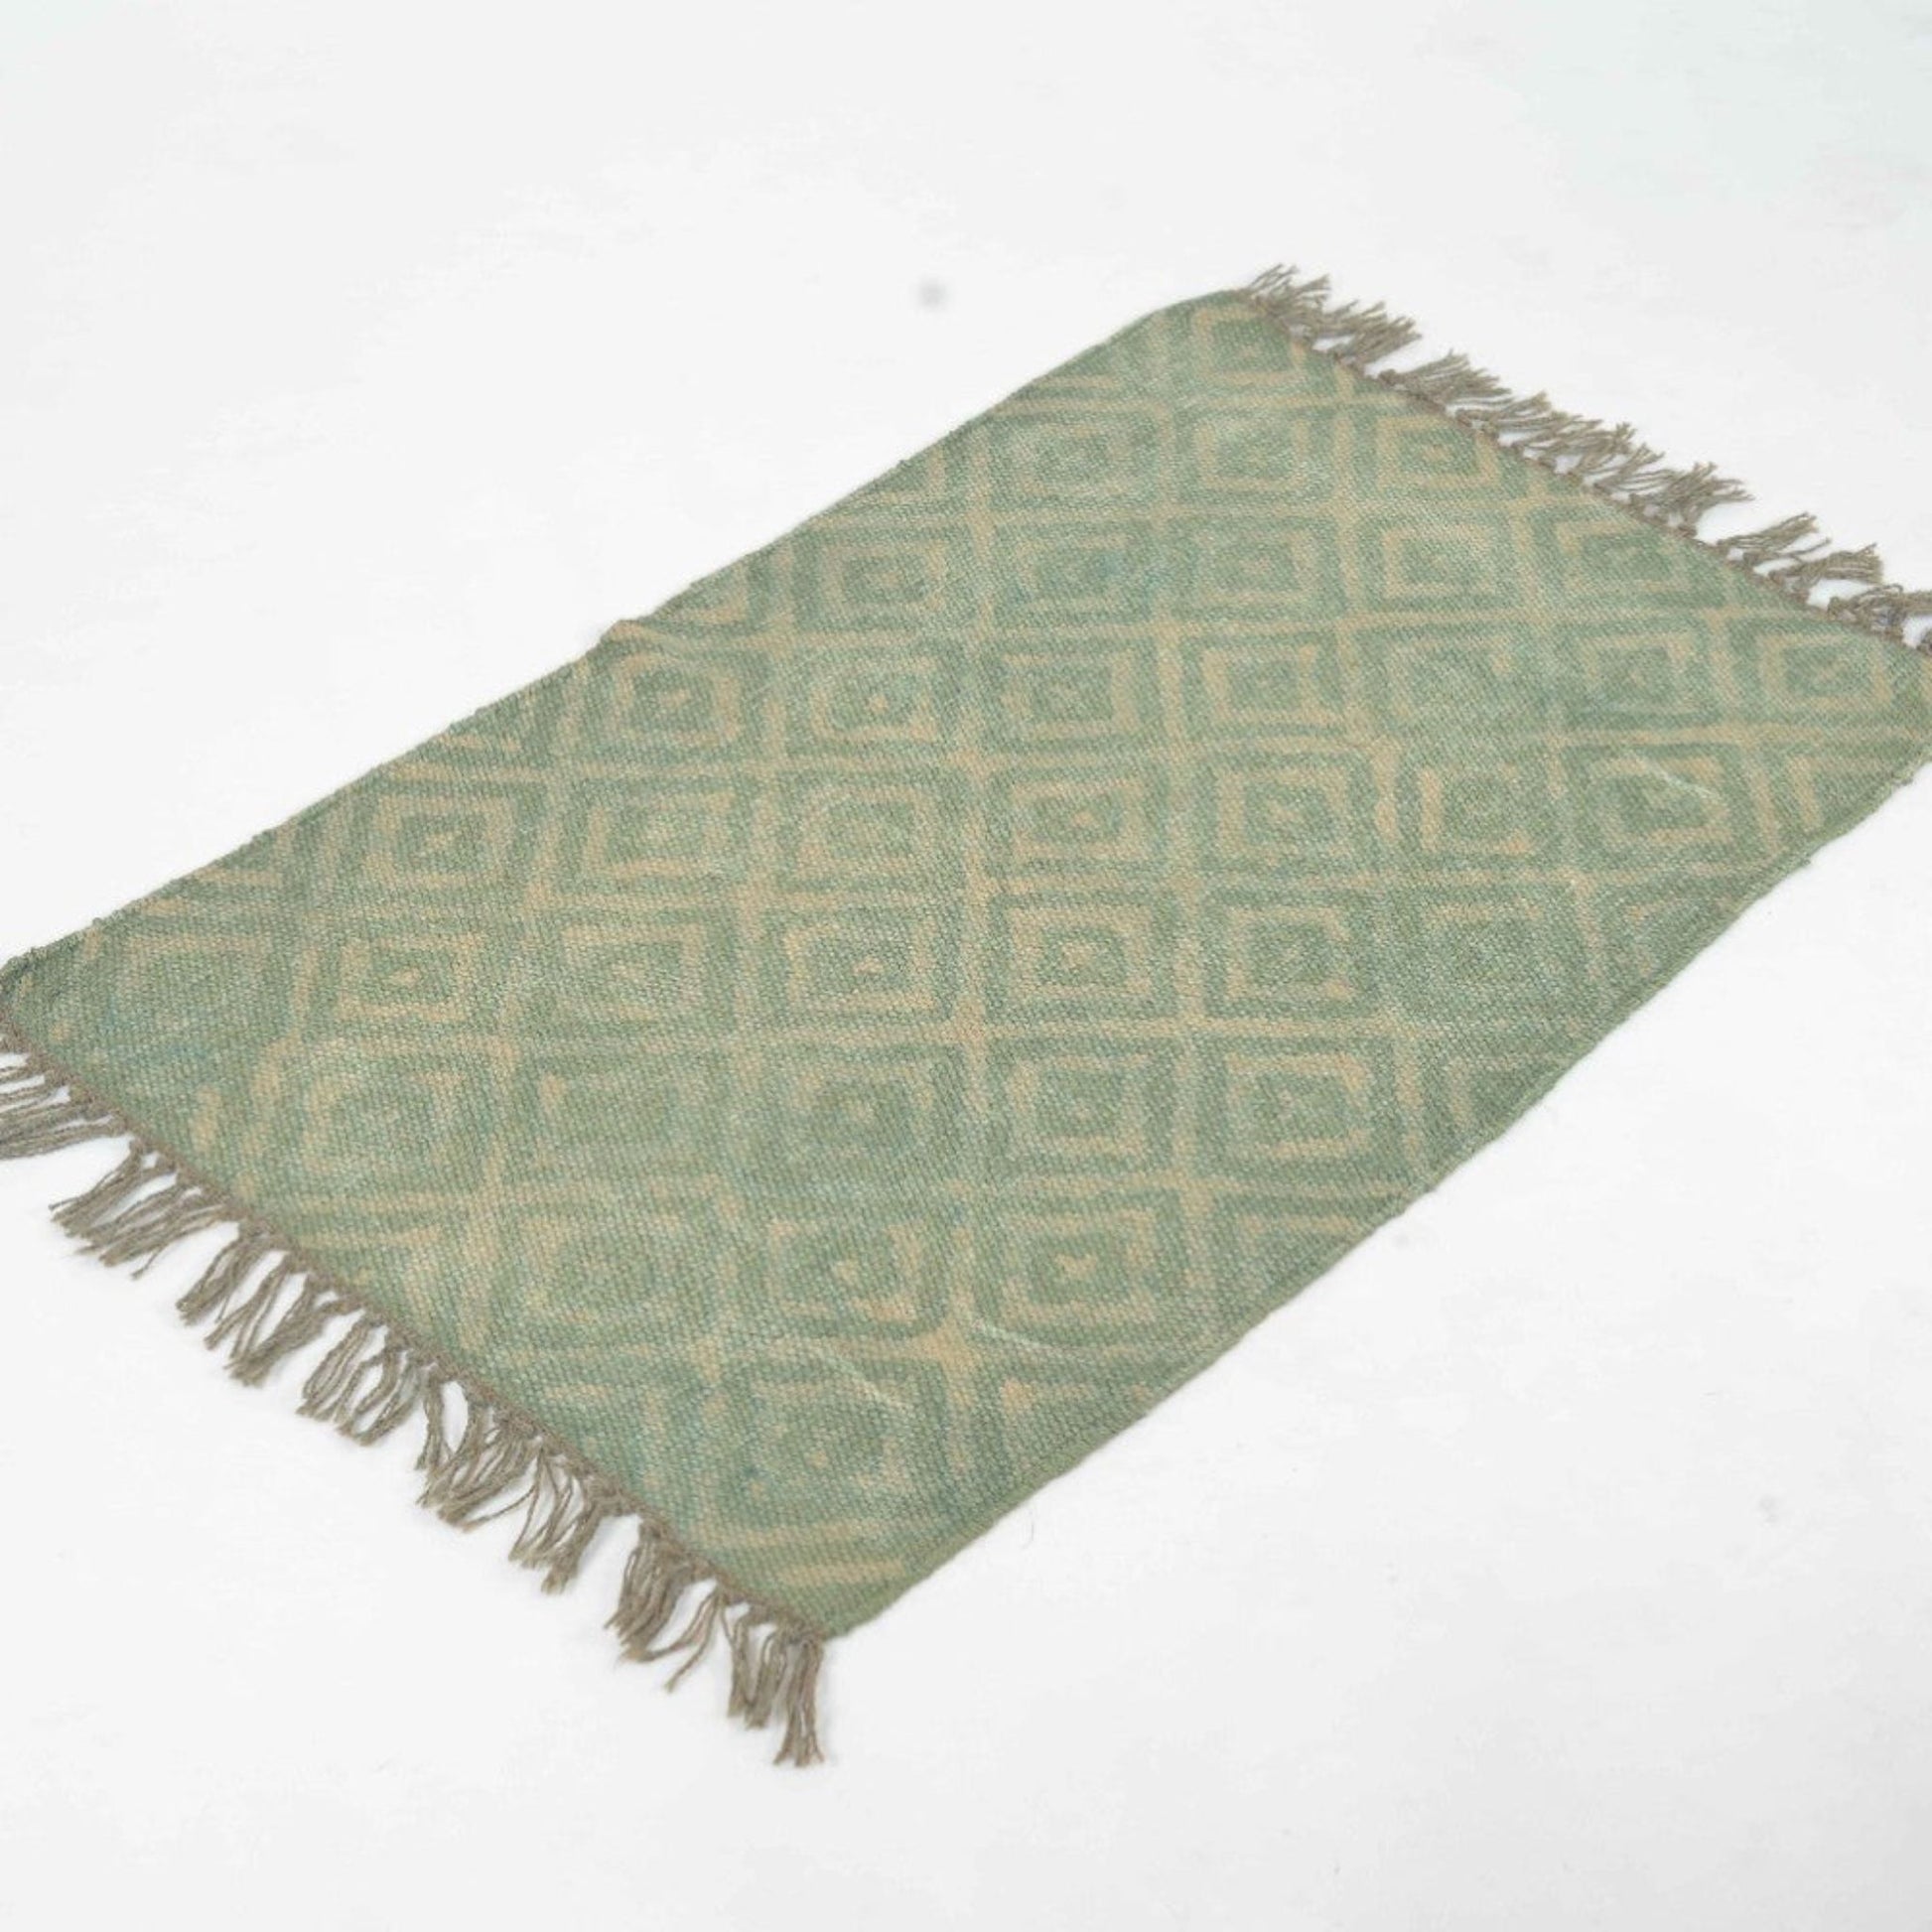 Hand Block Printed Cotton Rug in a Jute natural color with ornaments on it